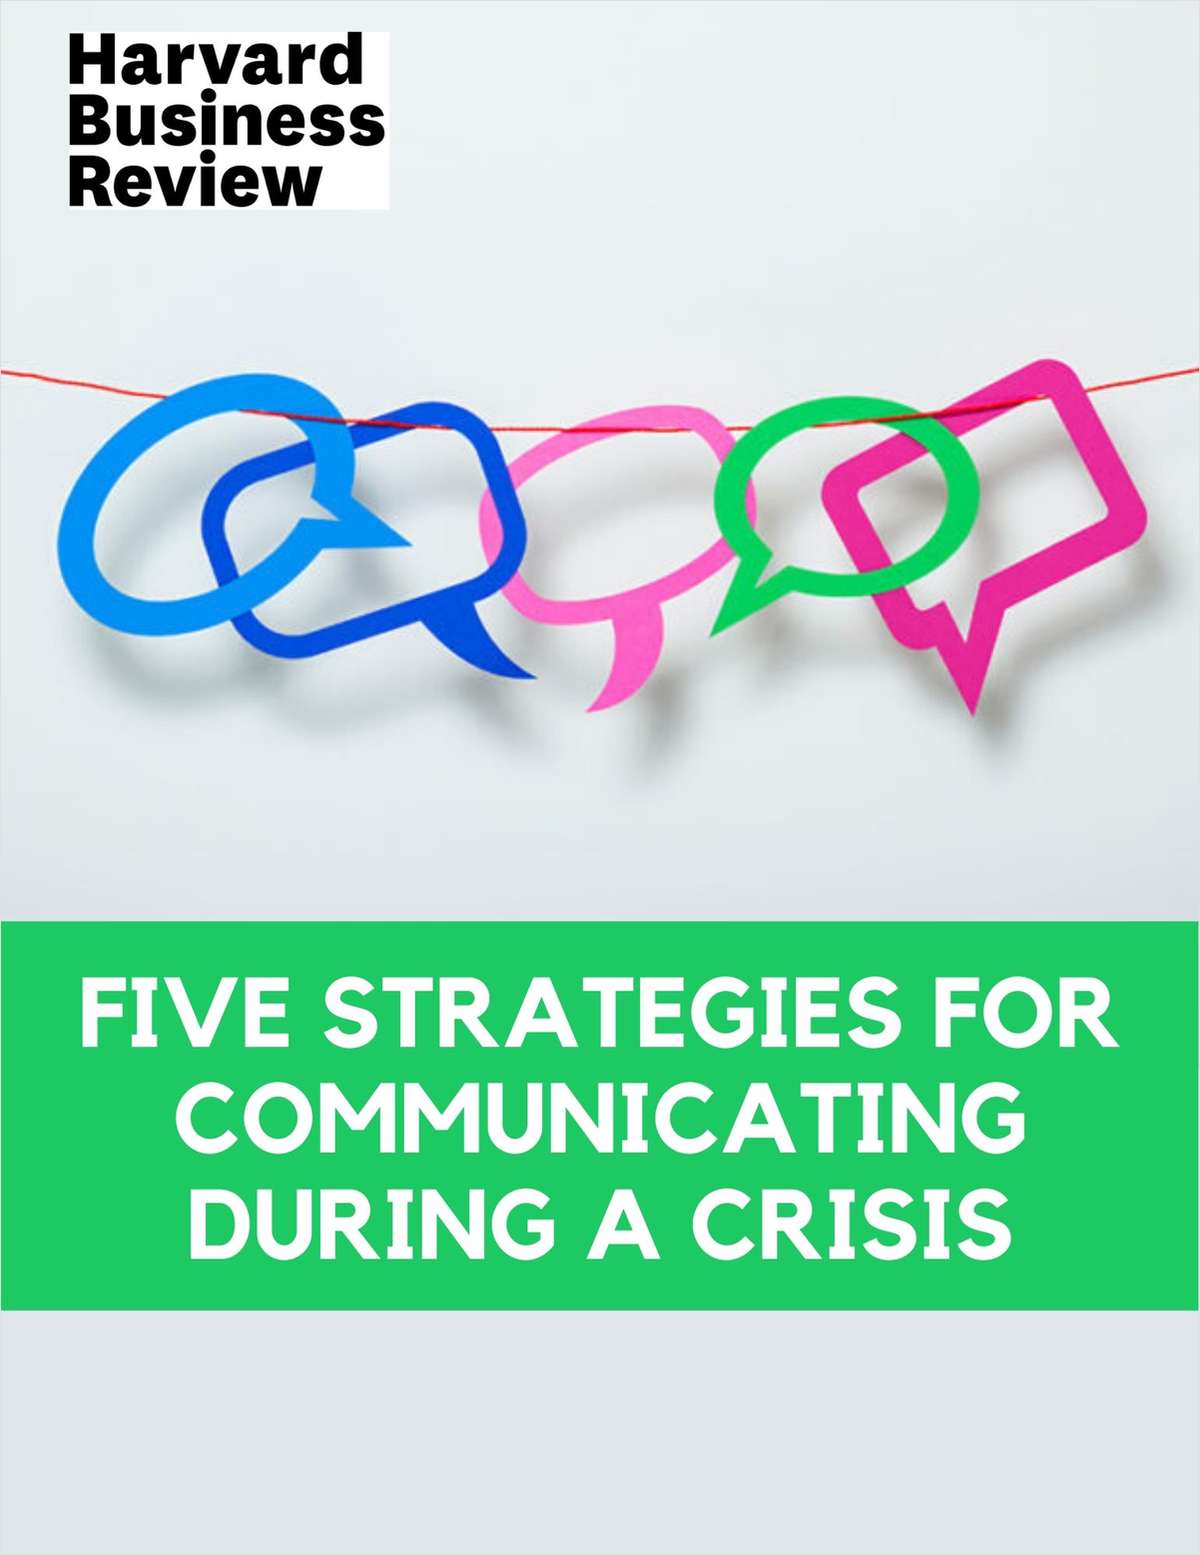 Five Strategies for Communicating During a Crisis